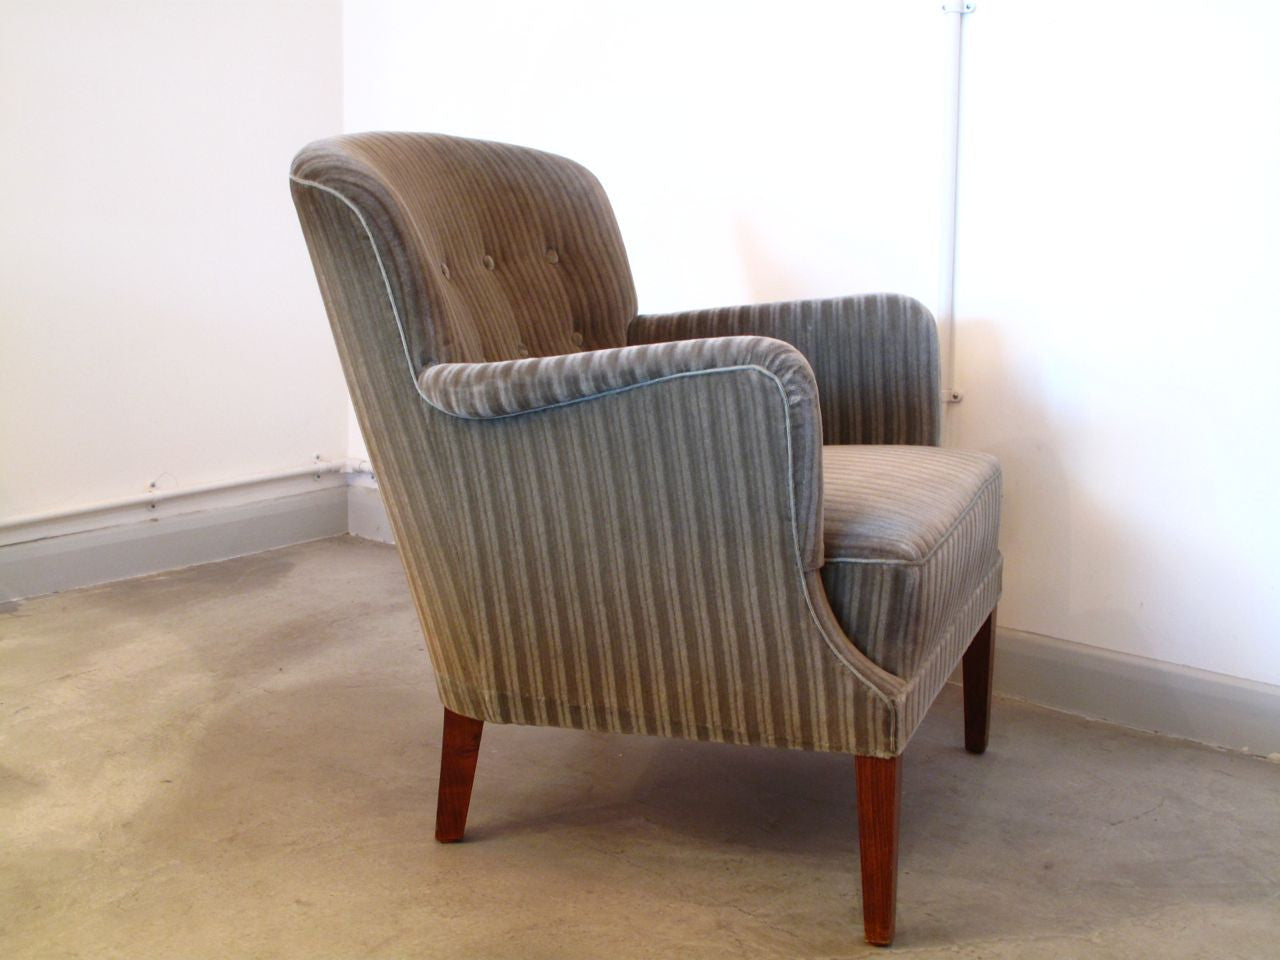 1940s/1950s occasional chair